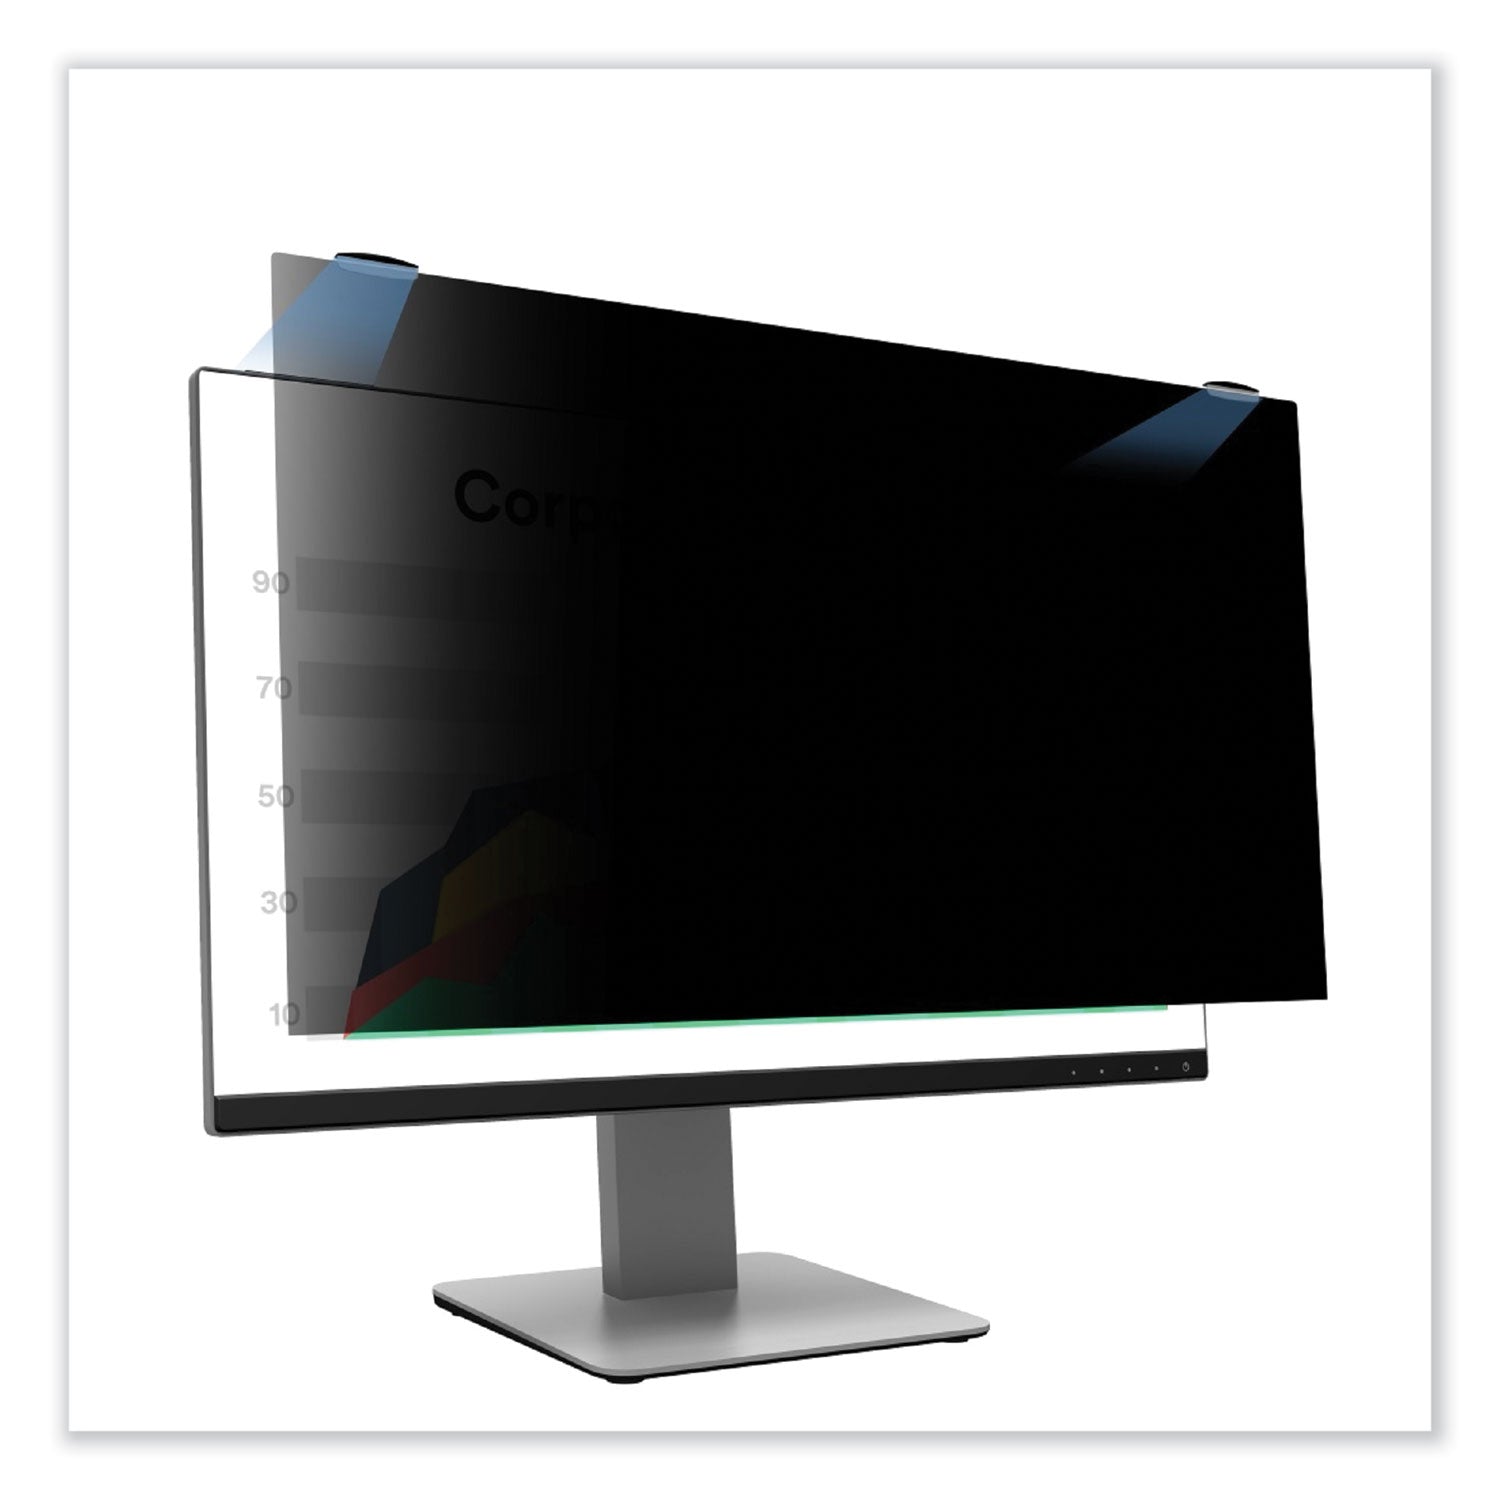 comply-magnetic-attach-privacy-filter-for-24-widescreen-flat-panel-monitor-1610-aspect-ratio_mmmpf240w1em - 1